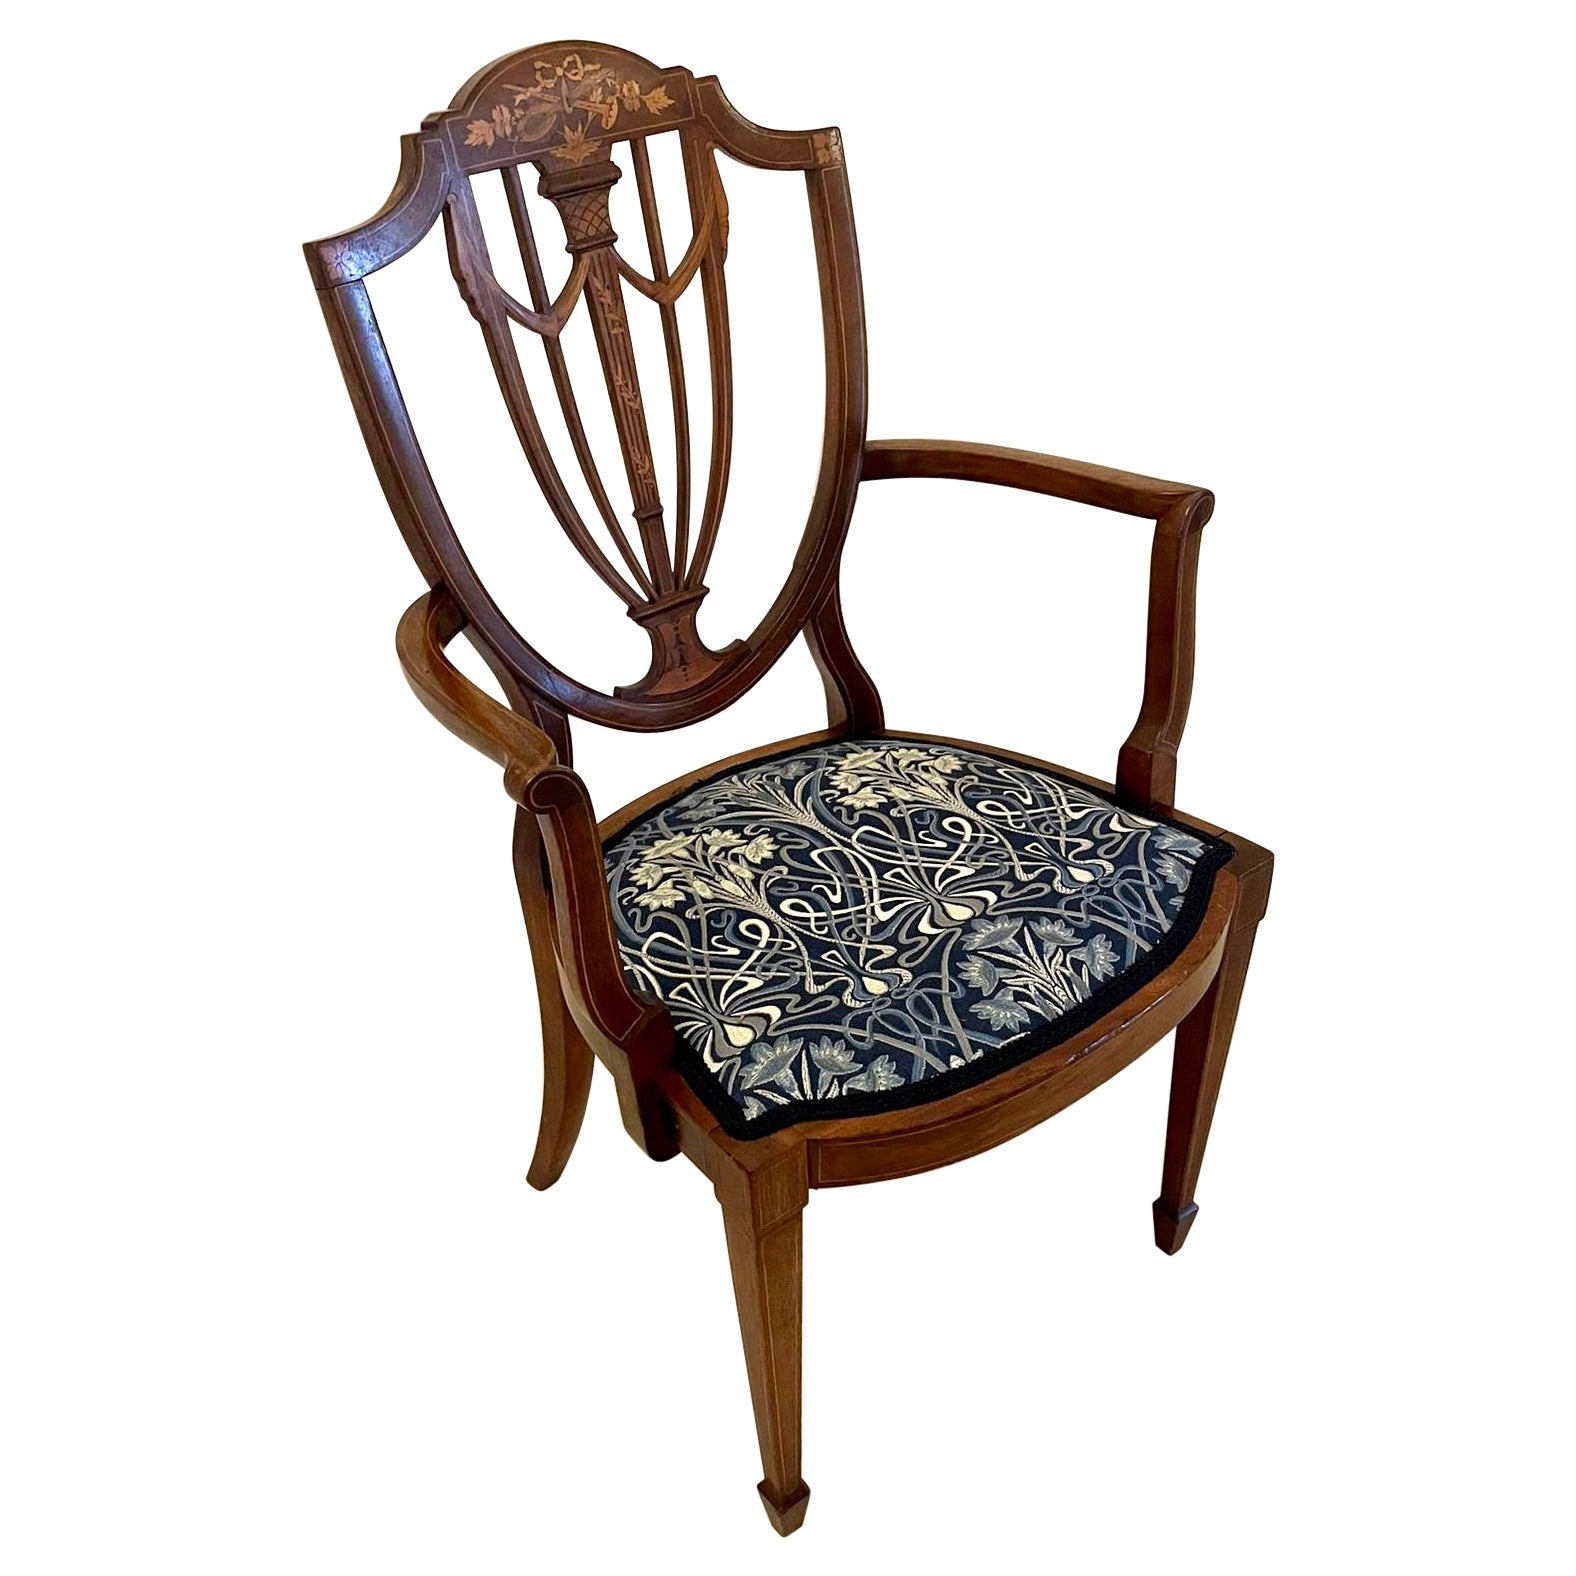 Fine Quality Antique Mahogany Inlaid Desk Chair For Sale